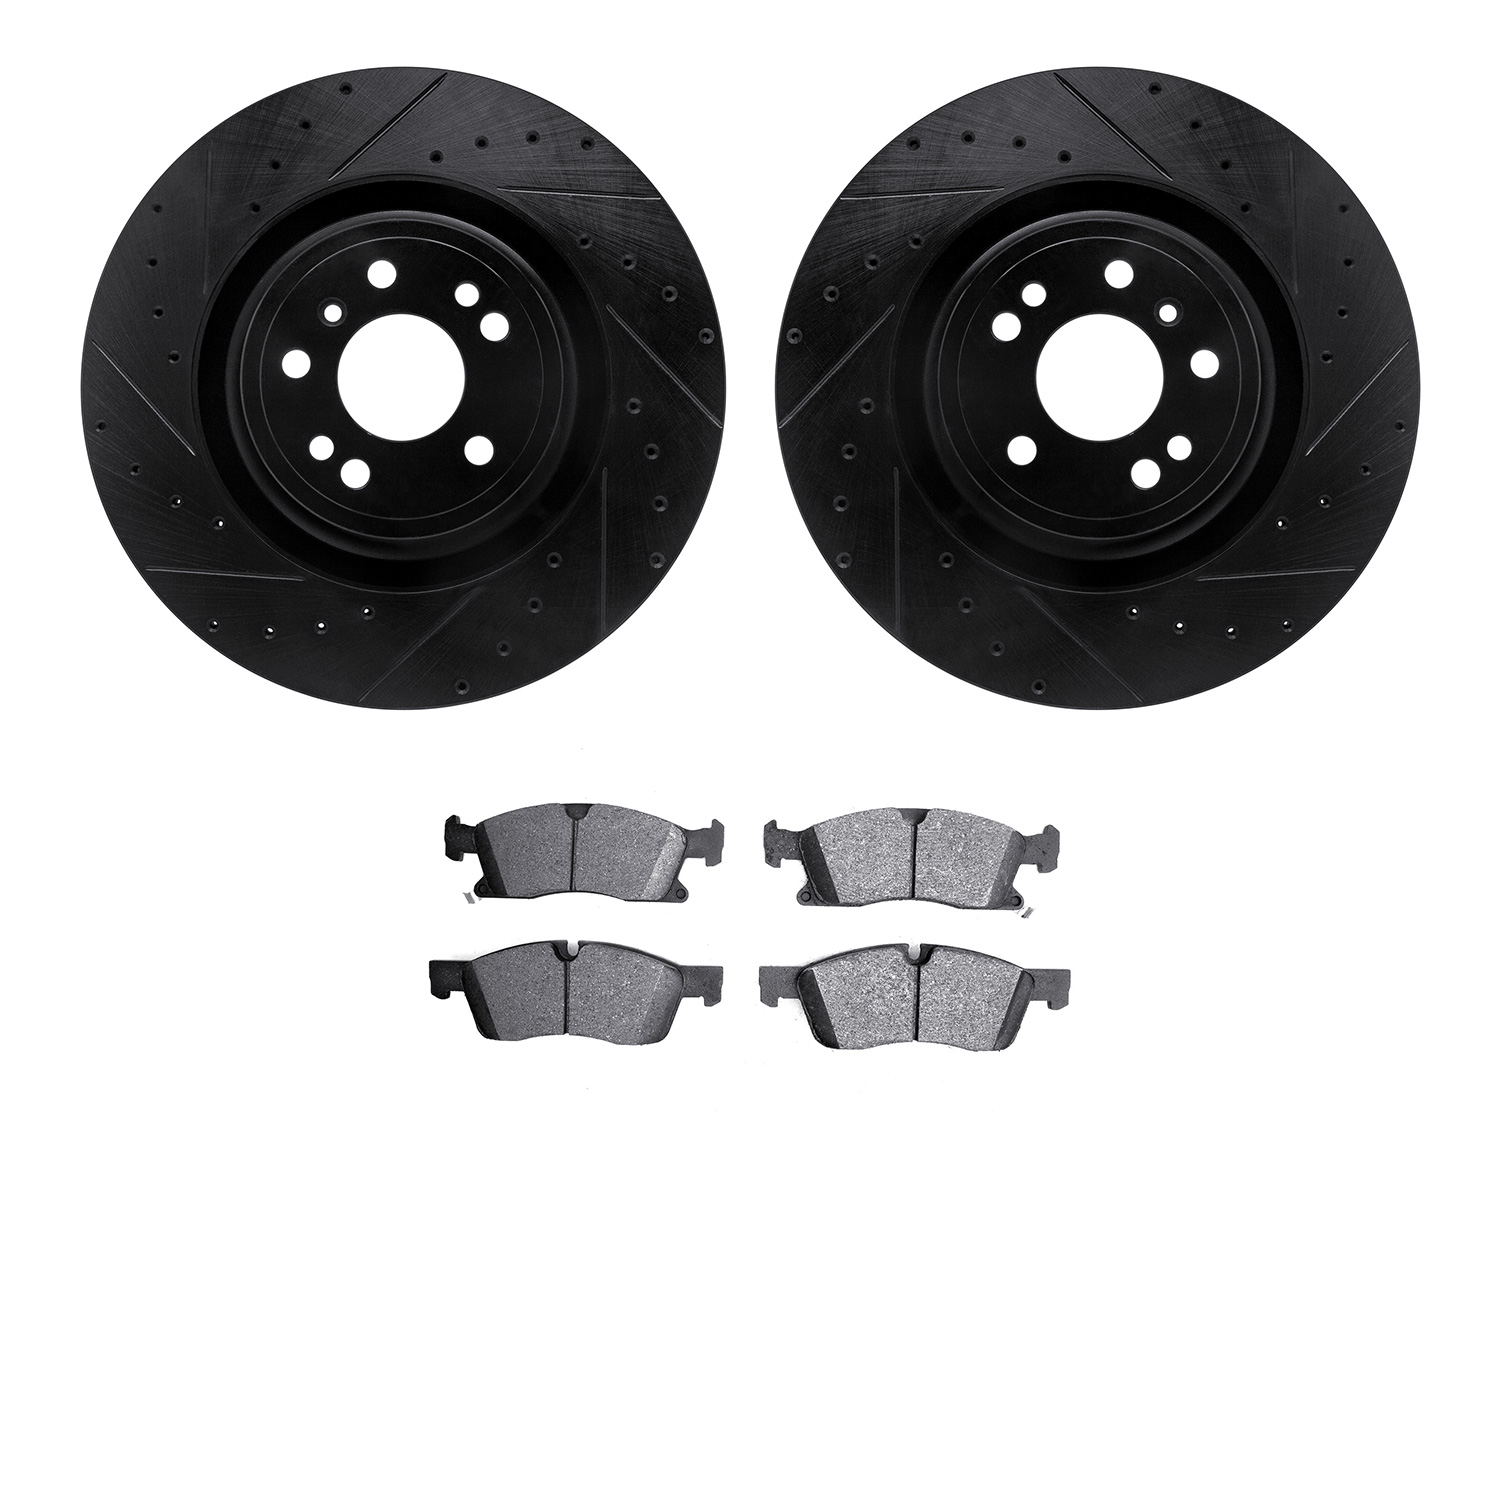 8402-63003 Drilled/Slotted Brake Rotors with Ultimate-Duty Brake Pads Kit [Black], 2013-2019 Mercedes-Benz, Position: Front